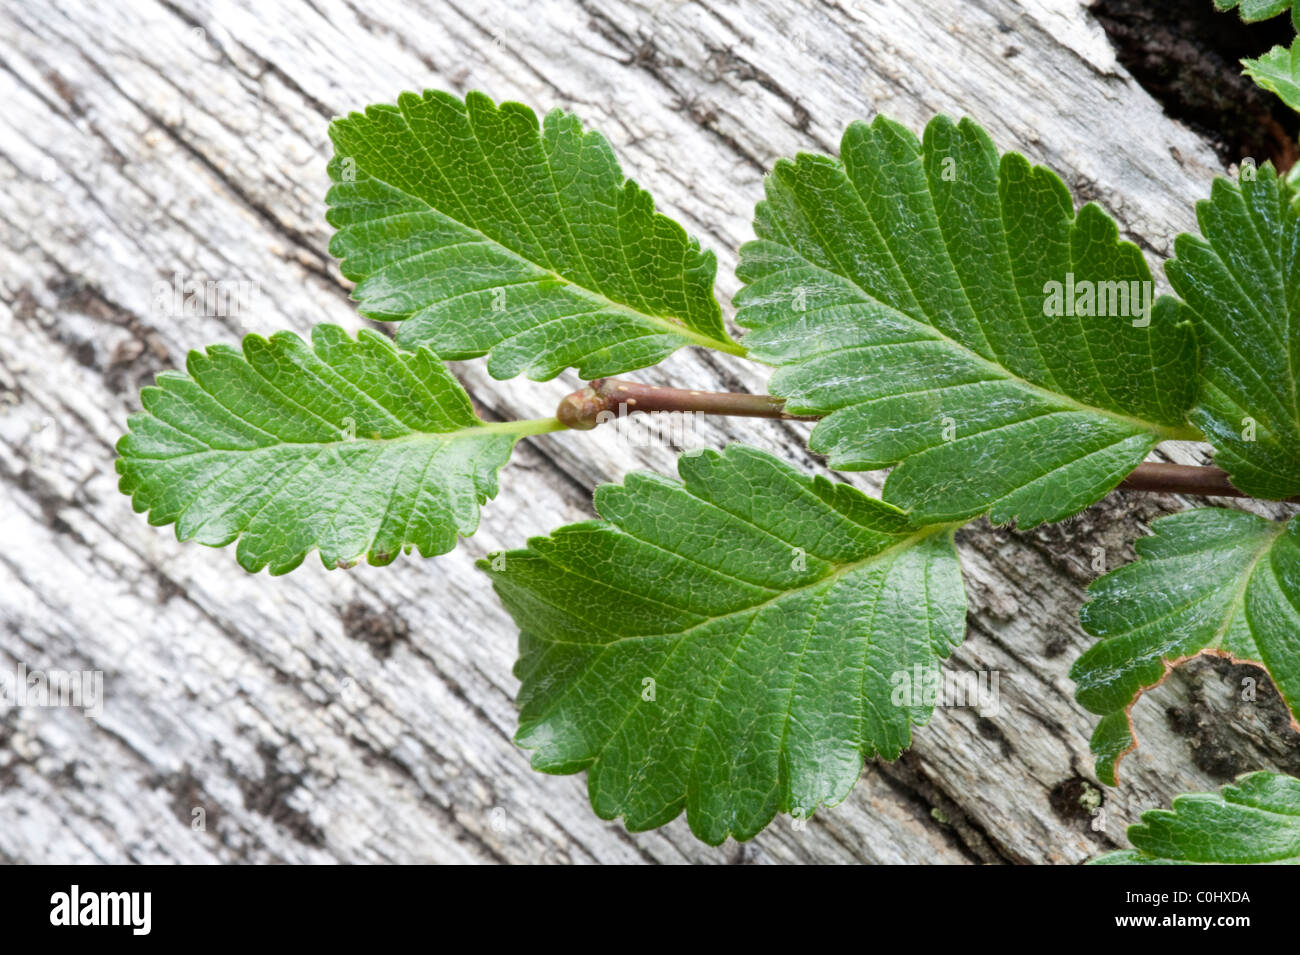 Southern Beech, Lenga (Nothofagus pumilio) bark and leaves Torres del Paine National Park, Patagonia, Chile, South America Stock Photo